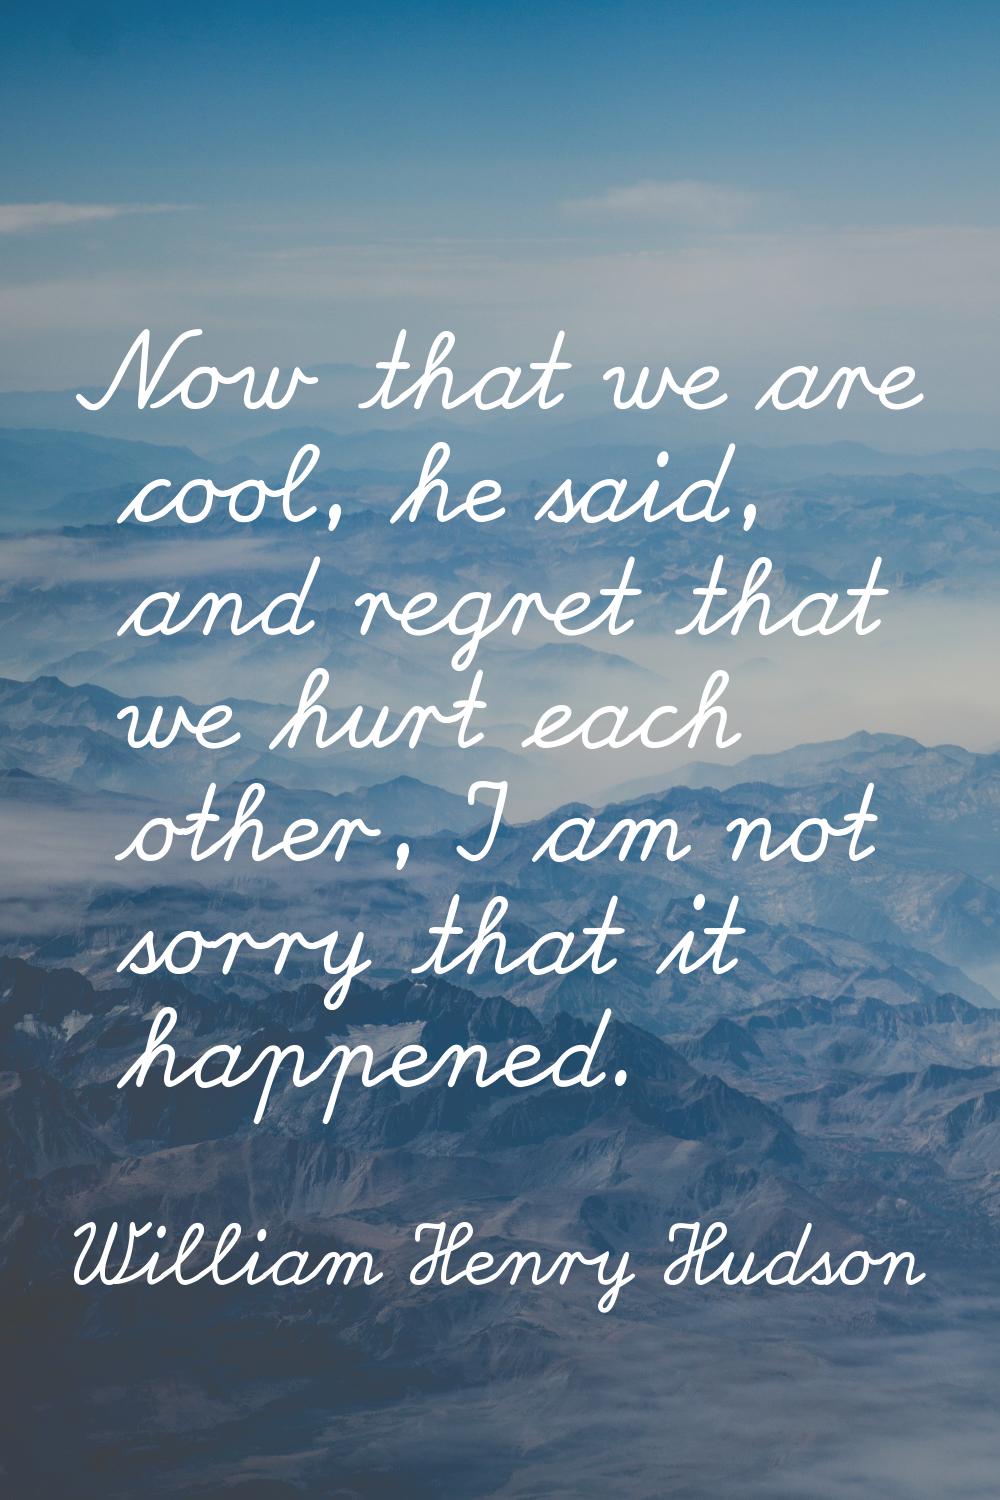 Now that we are cool, he said, and regret that we hurt each other, I am not sorry that it happened.